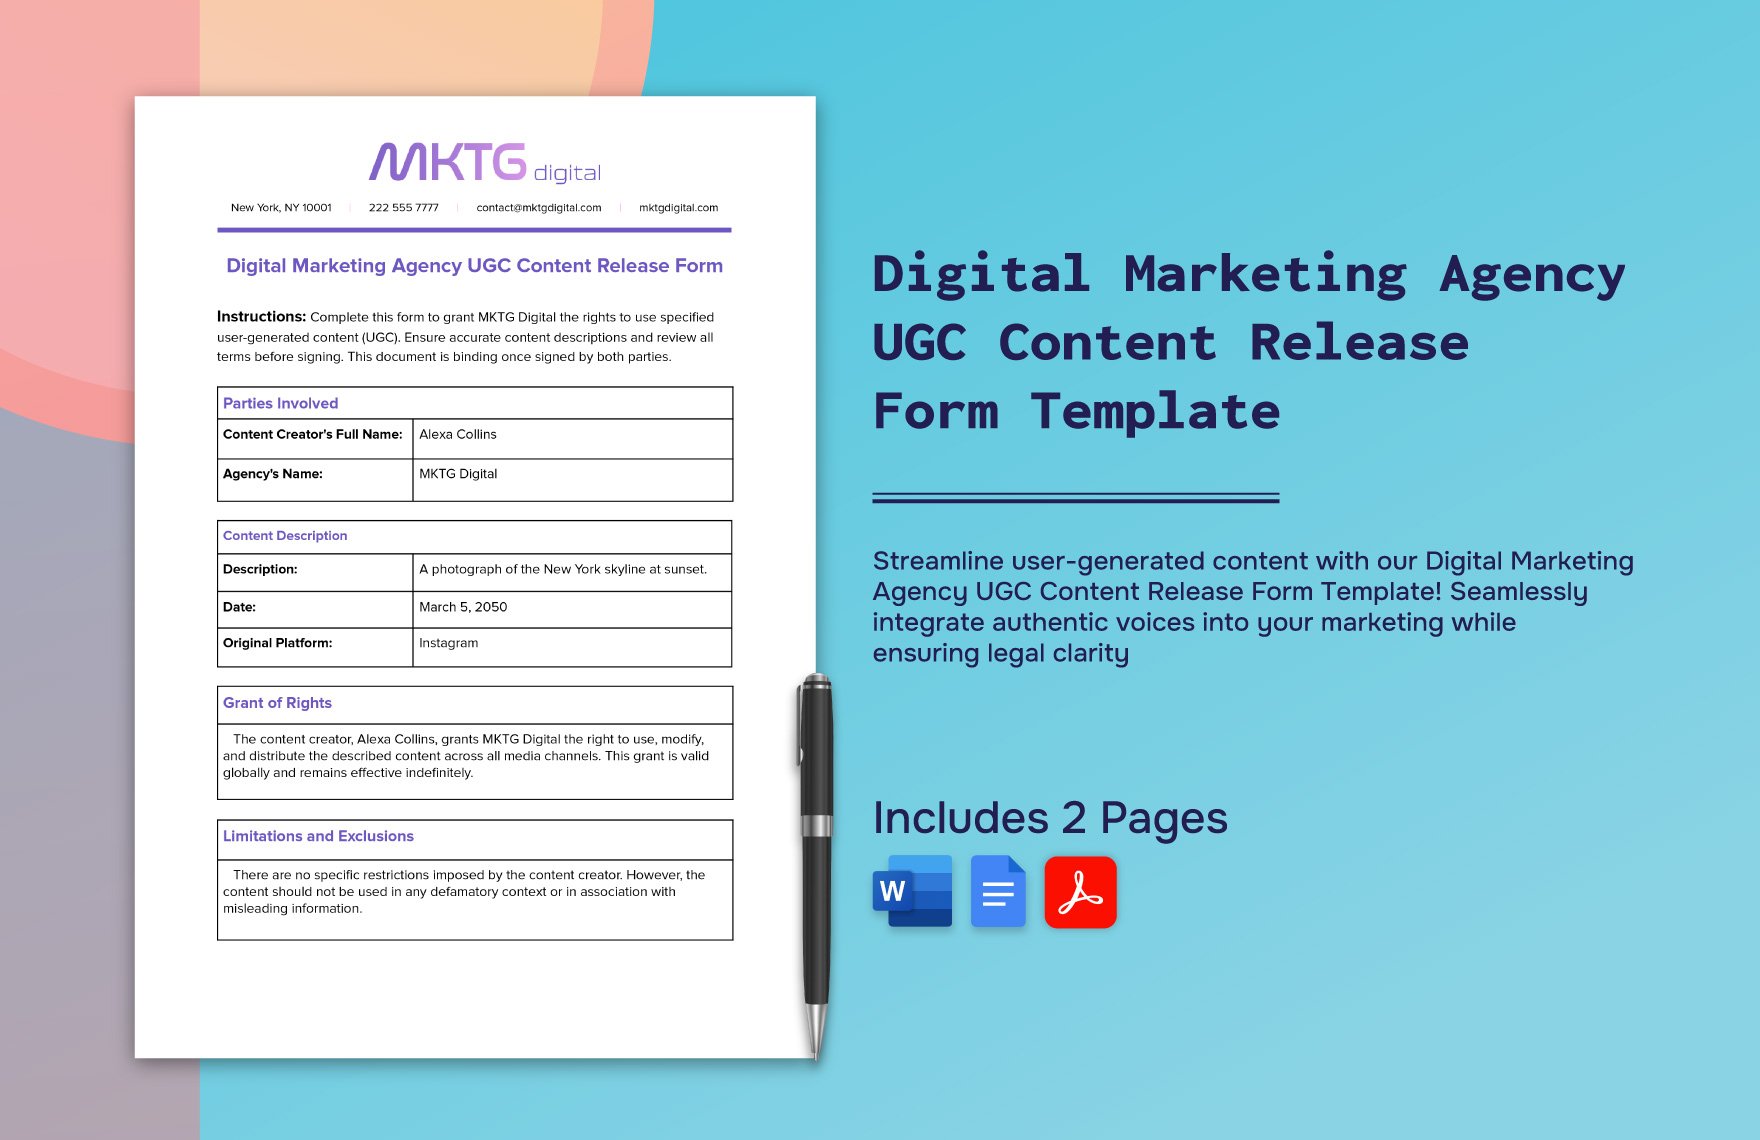 Digital Marketing Agency UGC Content Release Form Template